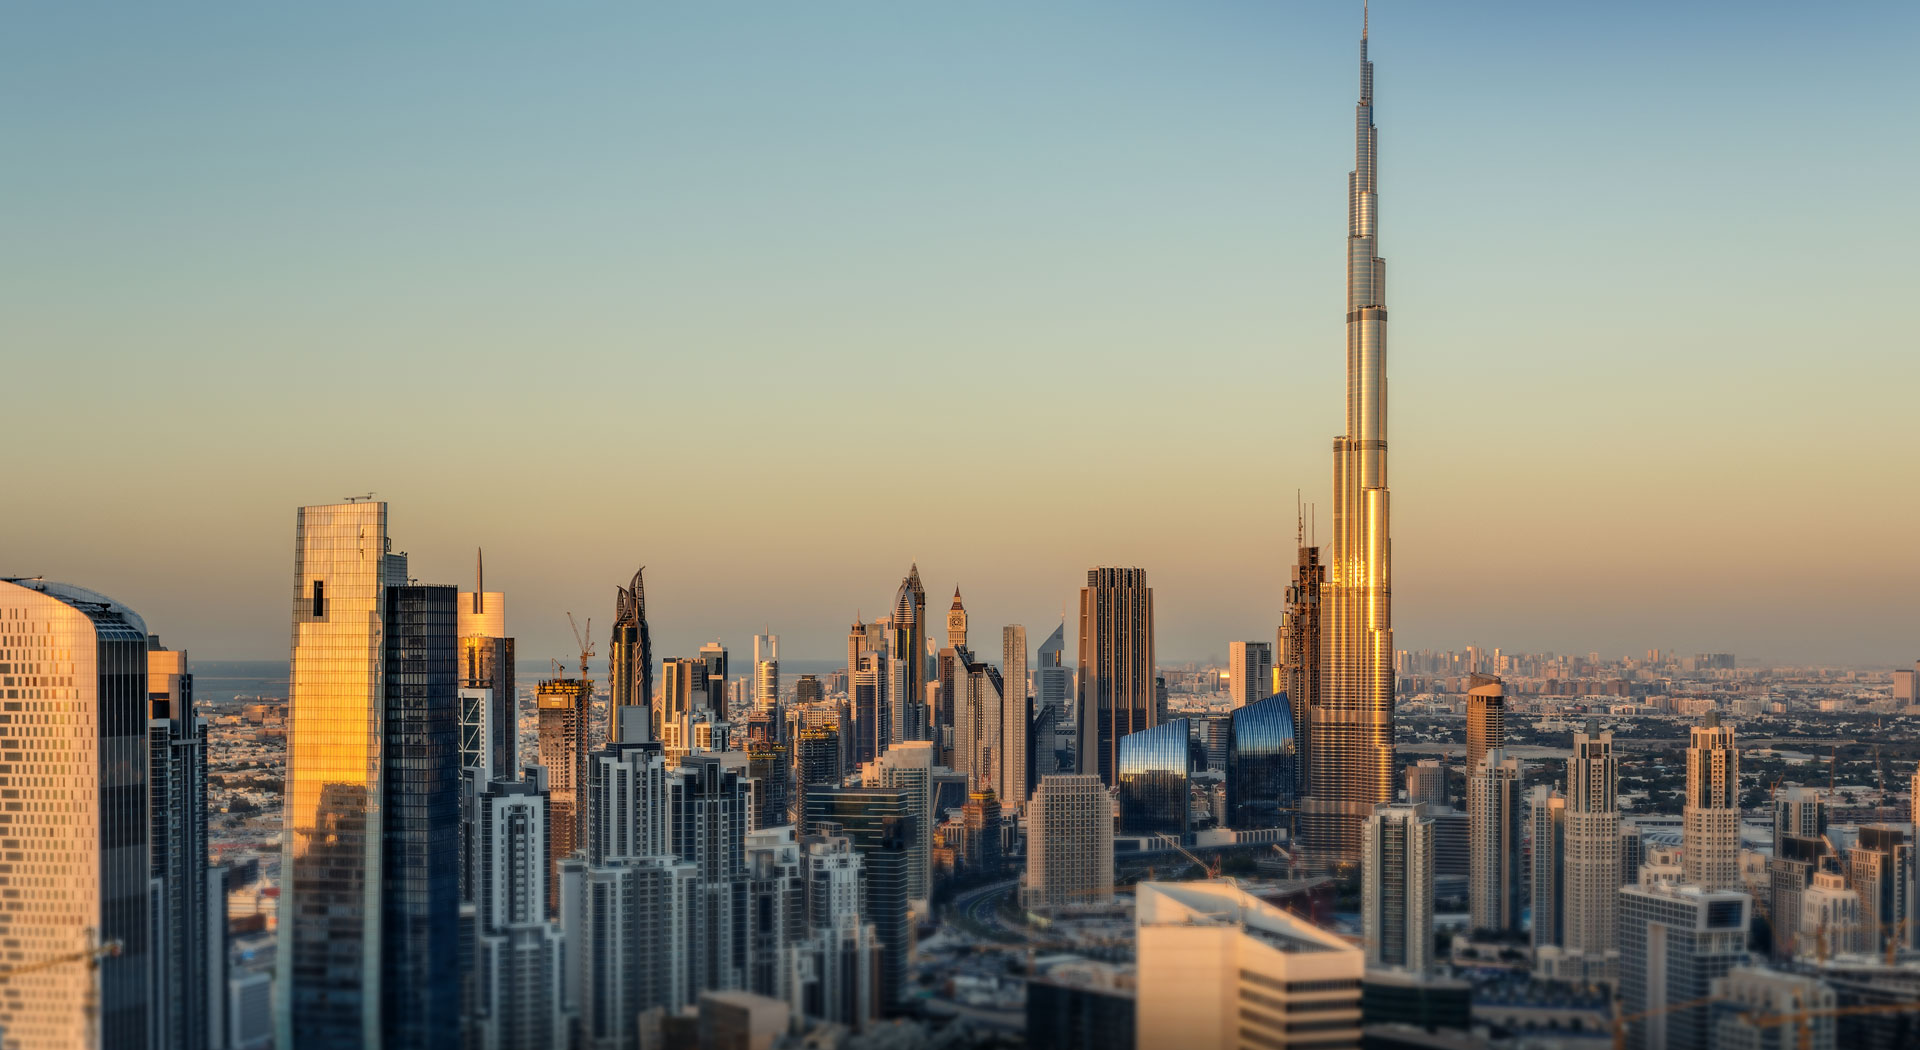 Dubai's real estate sector continues to build momentum